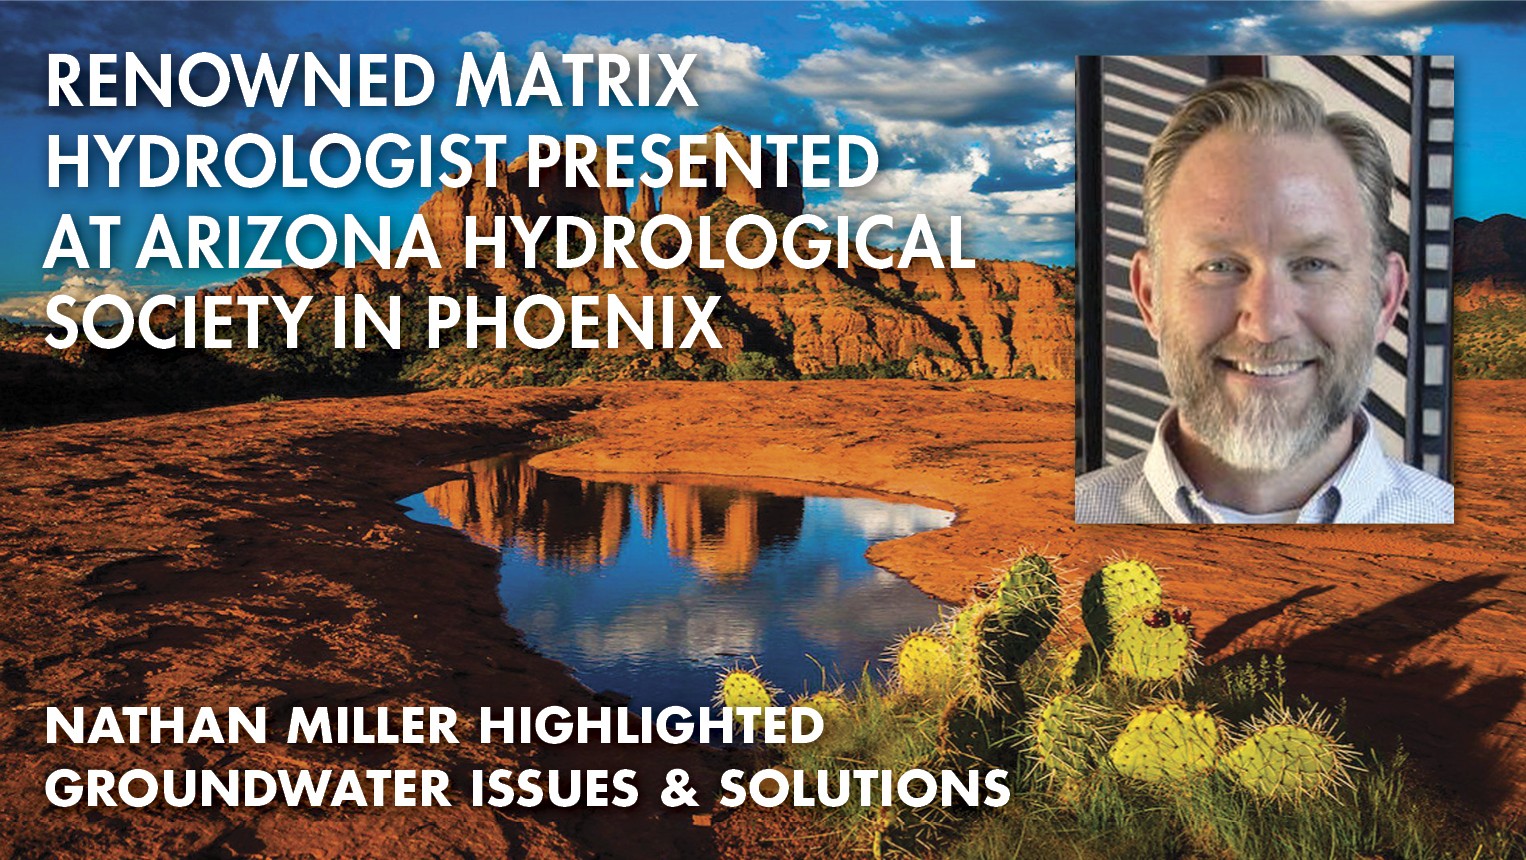 nathan miller headshot upper right corner on image of arizona desert with text about press release on image